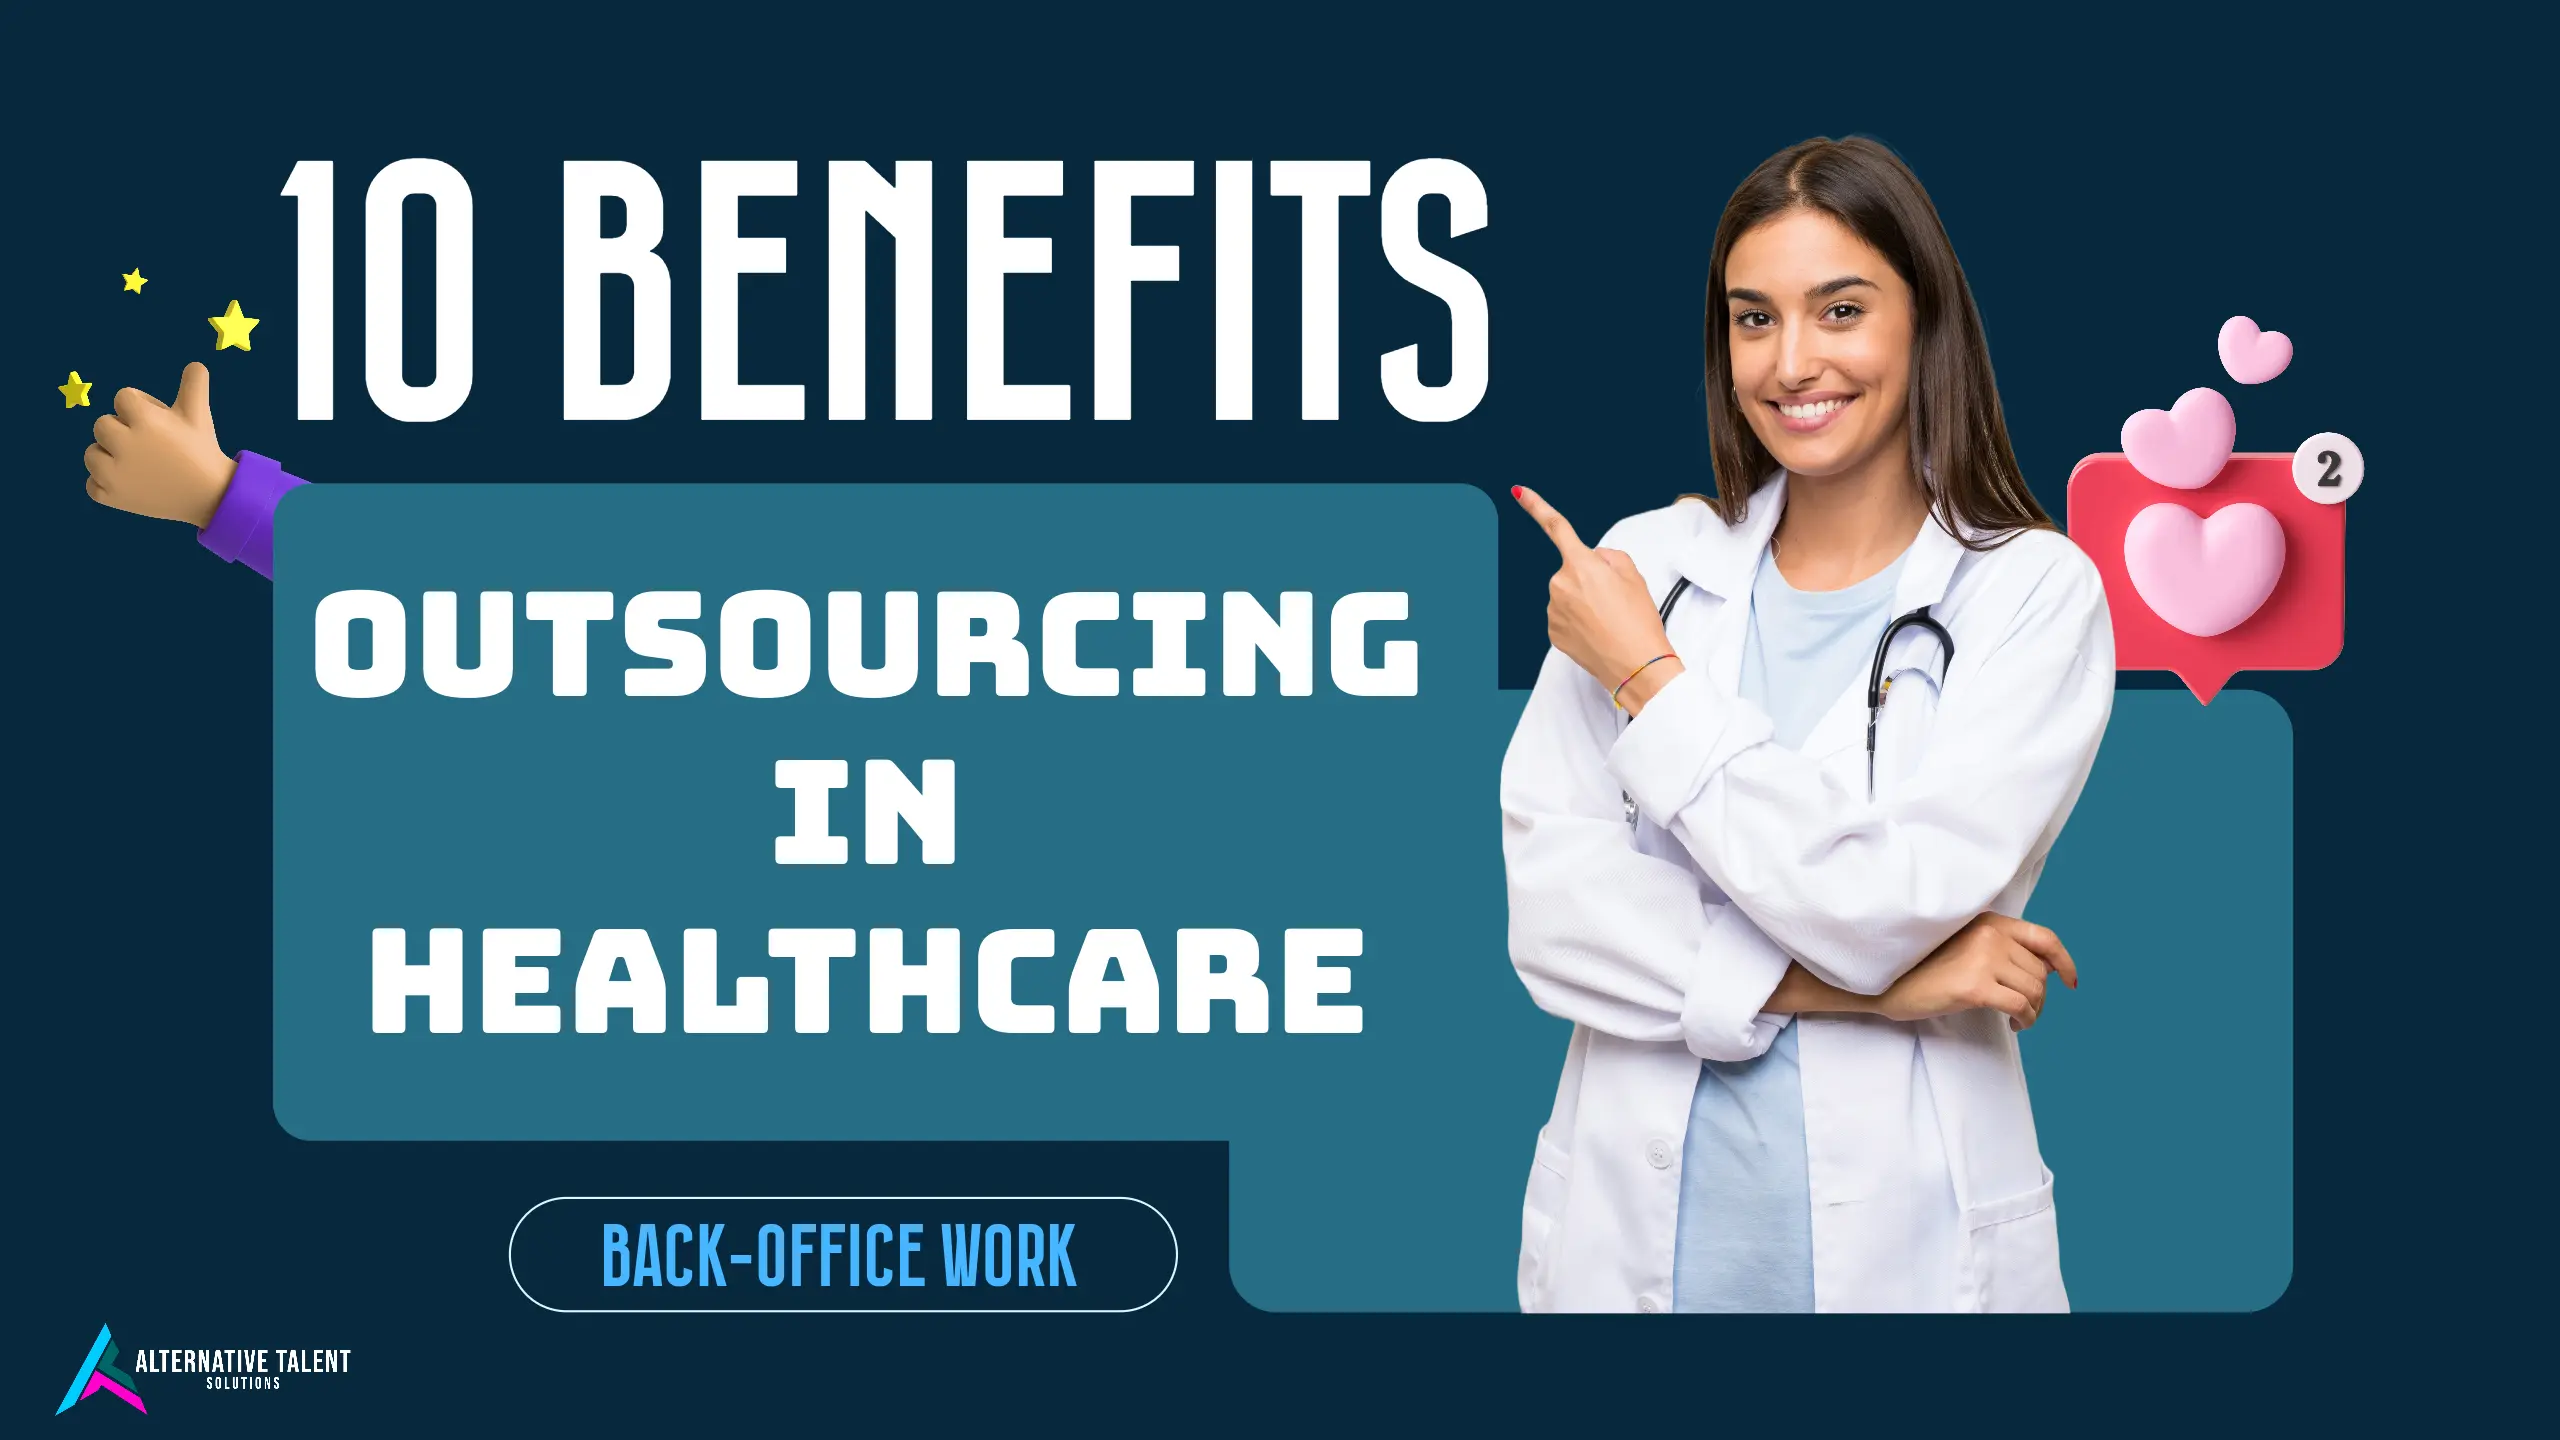 10 Benefits of Outsourcing in Healthcare